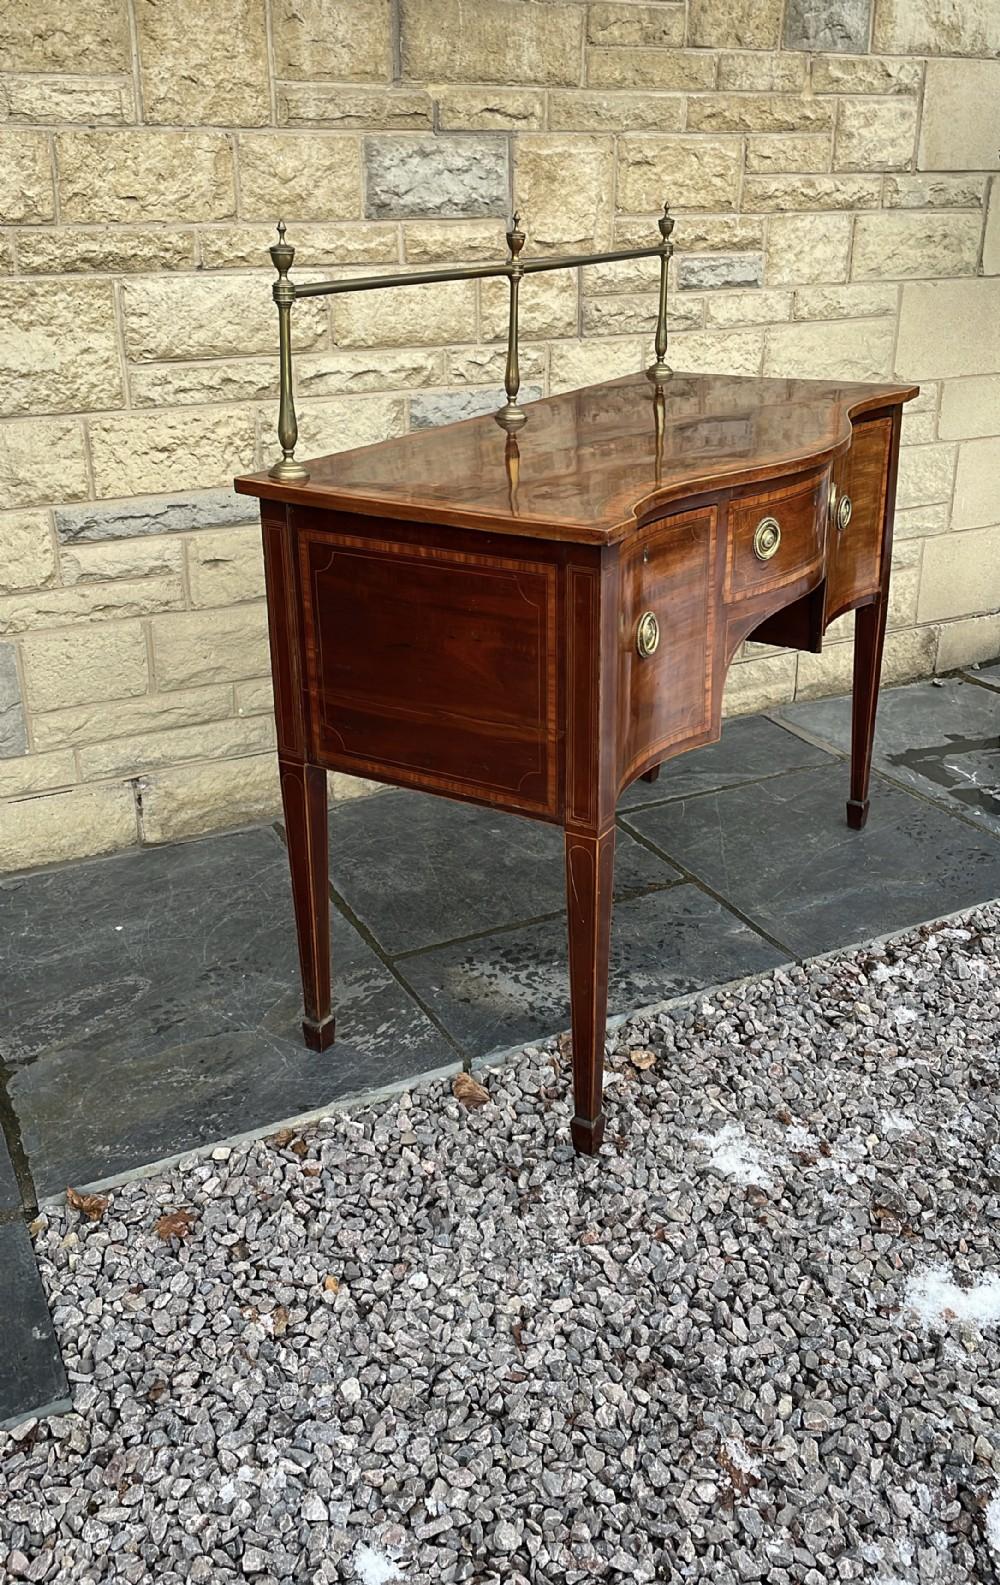  Early 19th C. English Inlaid Figured Mahogany Hepp. Style Serpentine Sideboard For Sale 3